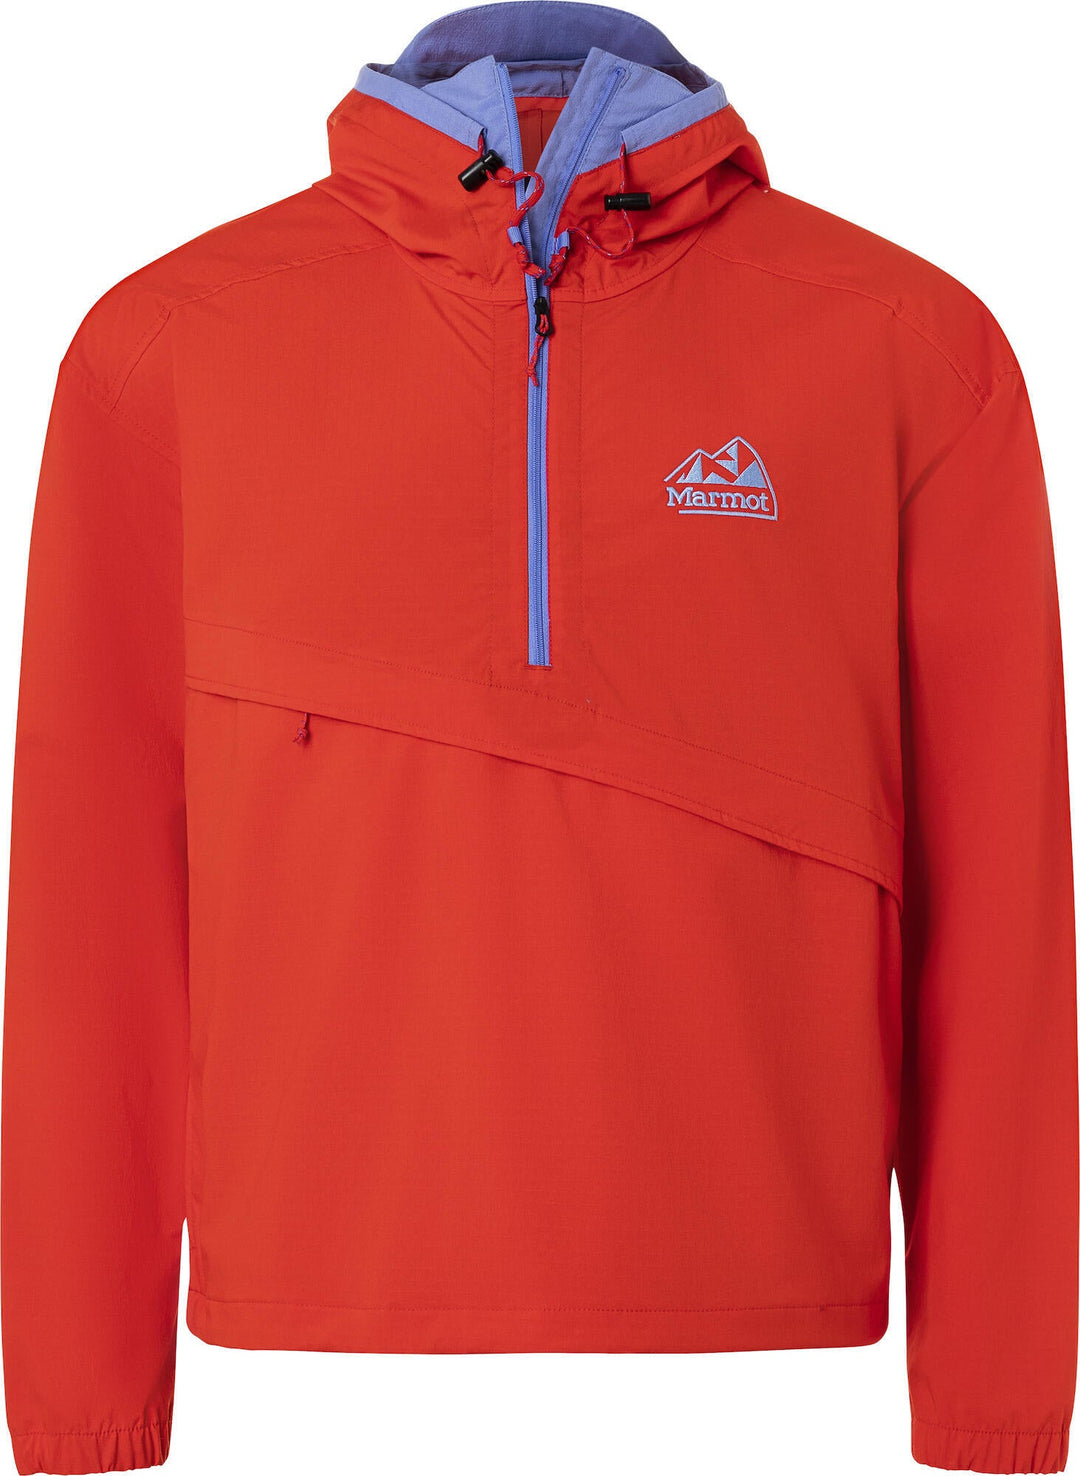 Boone Mountain Sports - M 96 ACTIVE ANORAK